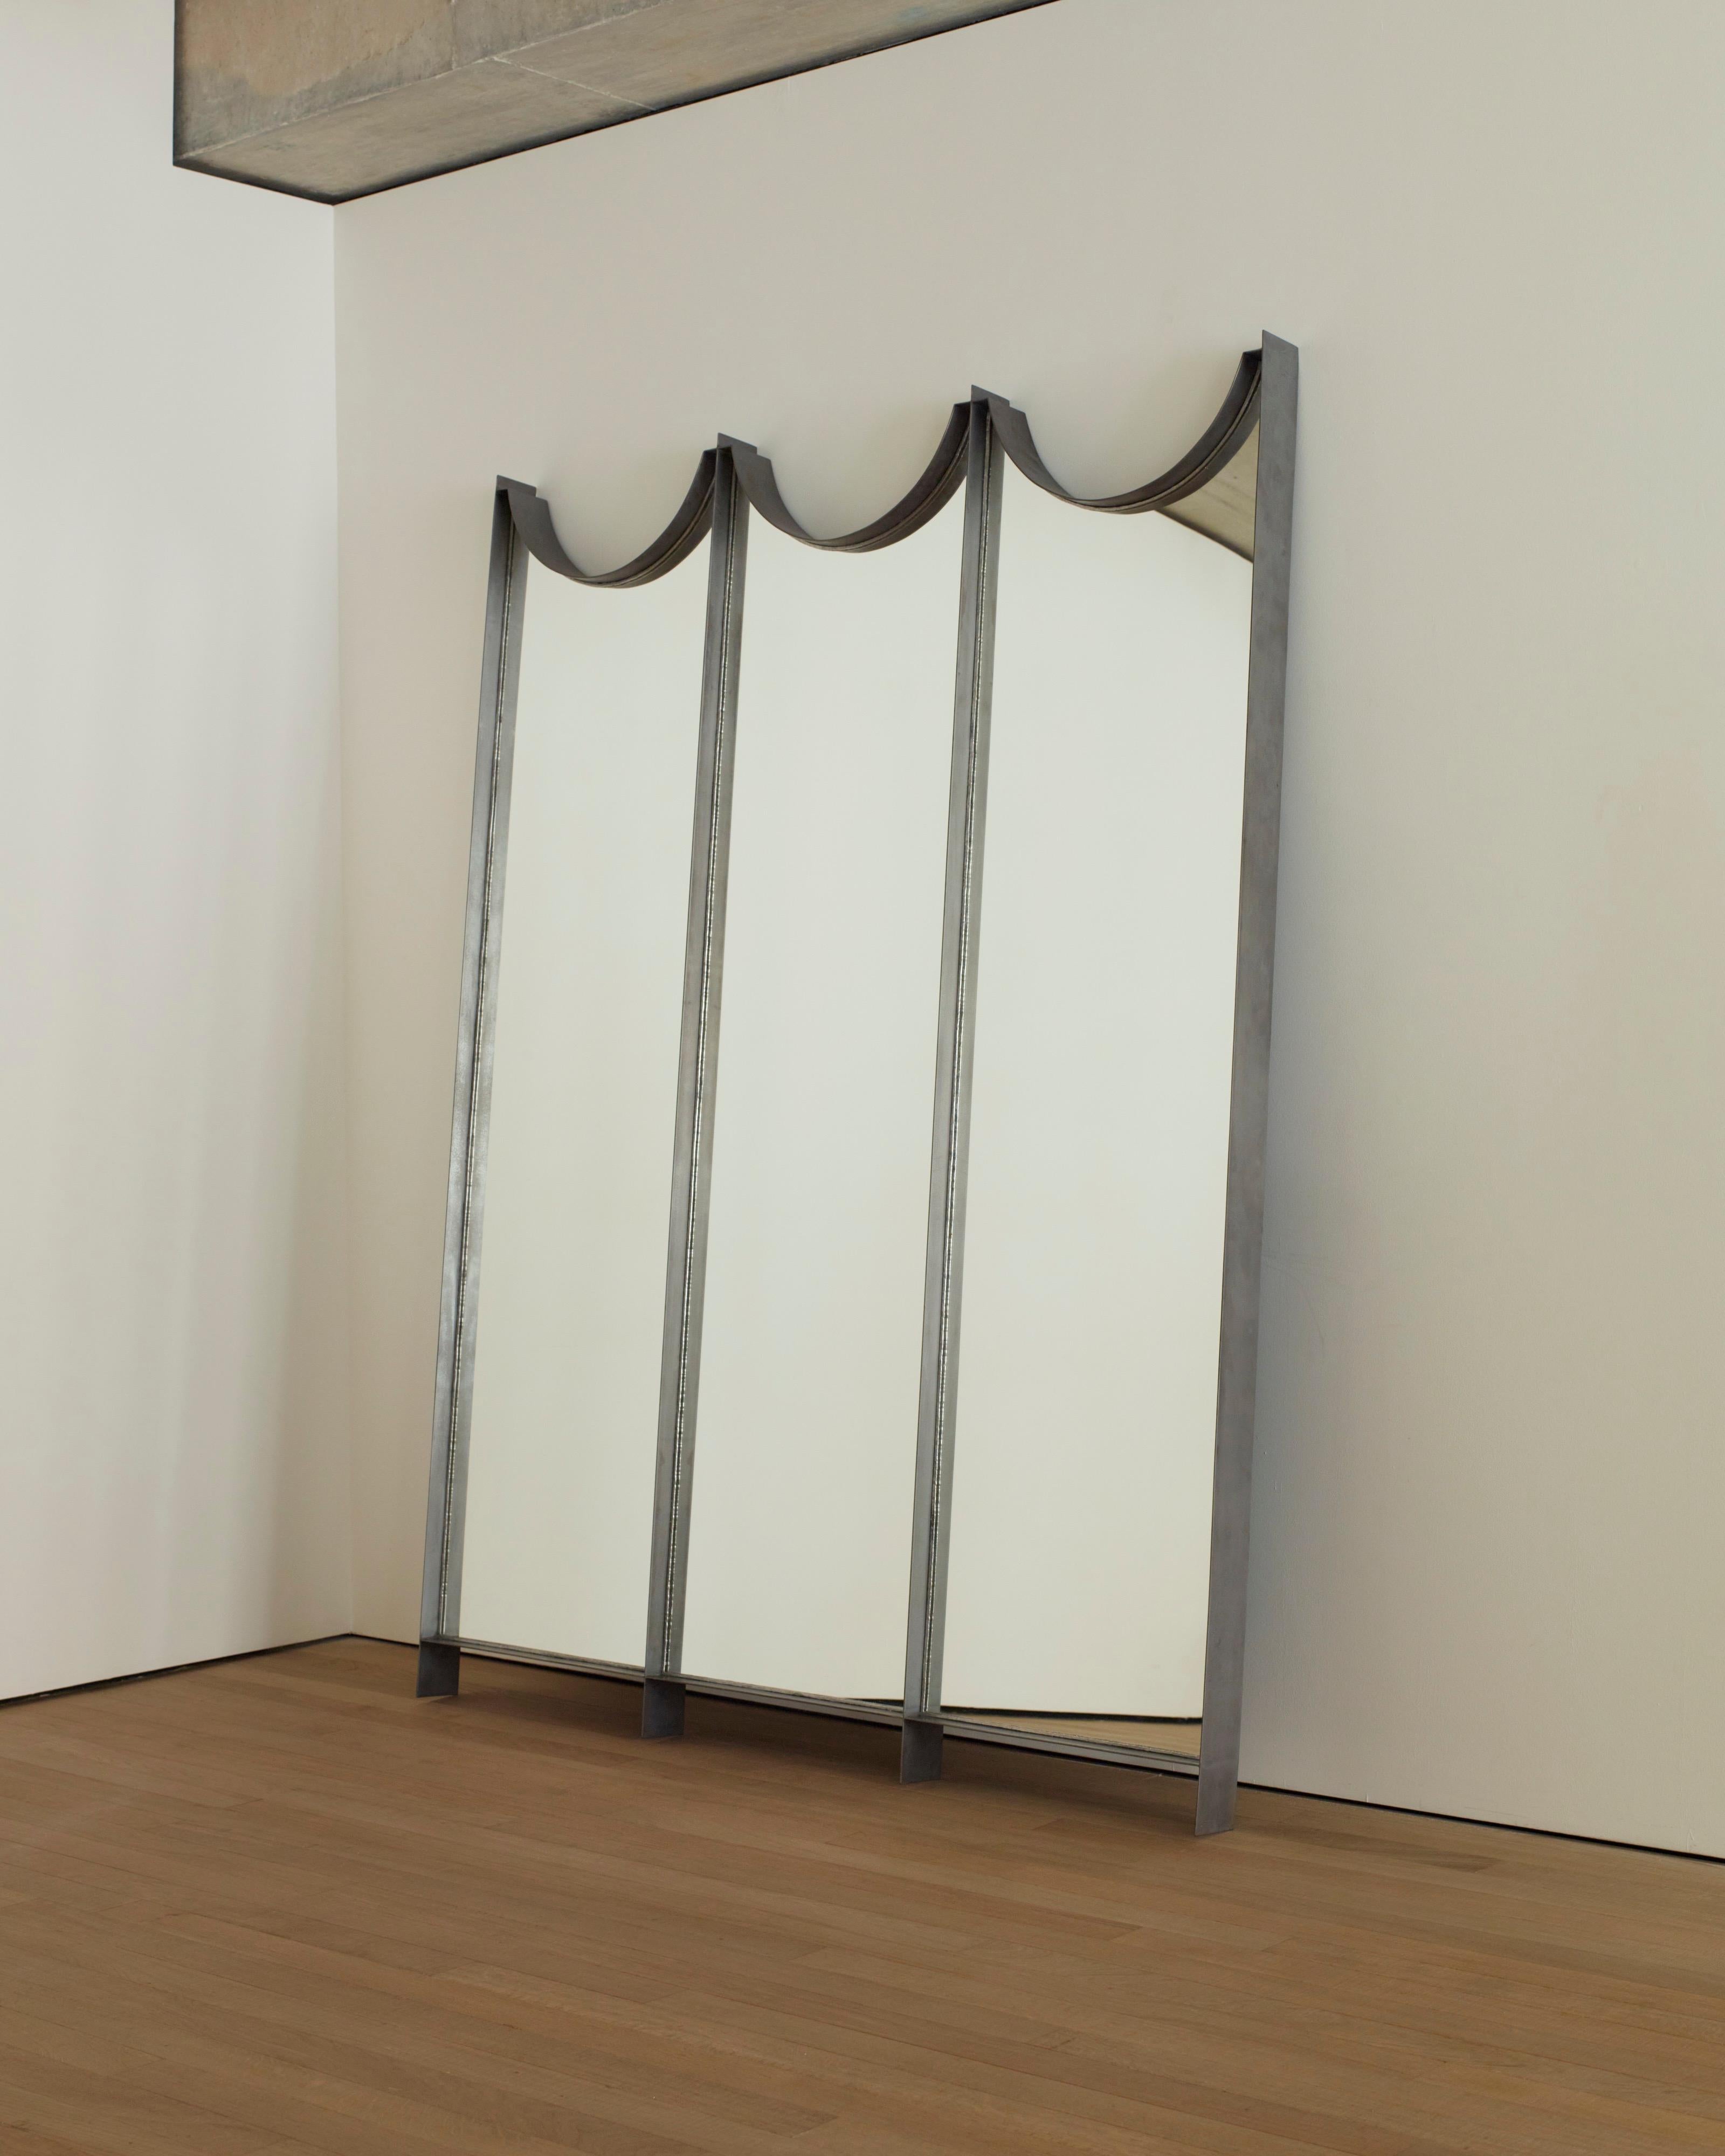 Entitled “Triple Talisman Mirror,” by renowned Paris/Tbilisi-based designers Rooms Studio, this 3-panel, full-length mirror is statuesque in presence and commanding in character. Whether wall-mounted or positioned on the floor, leaning against a